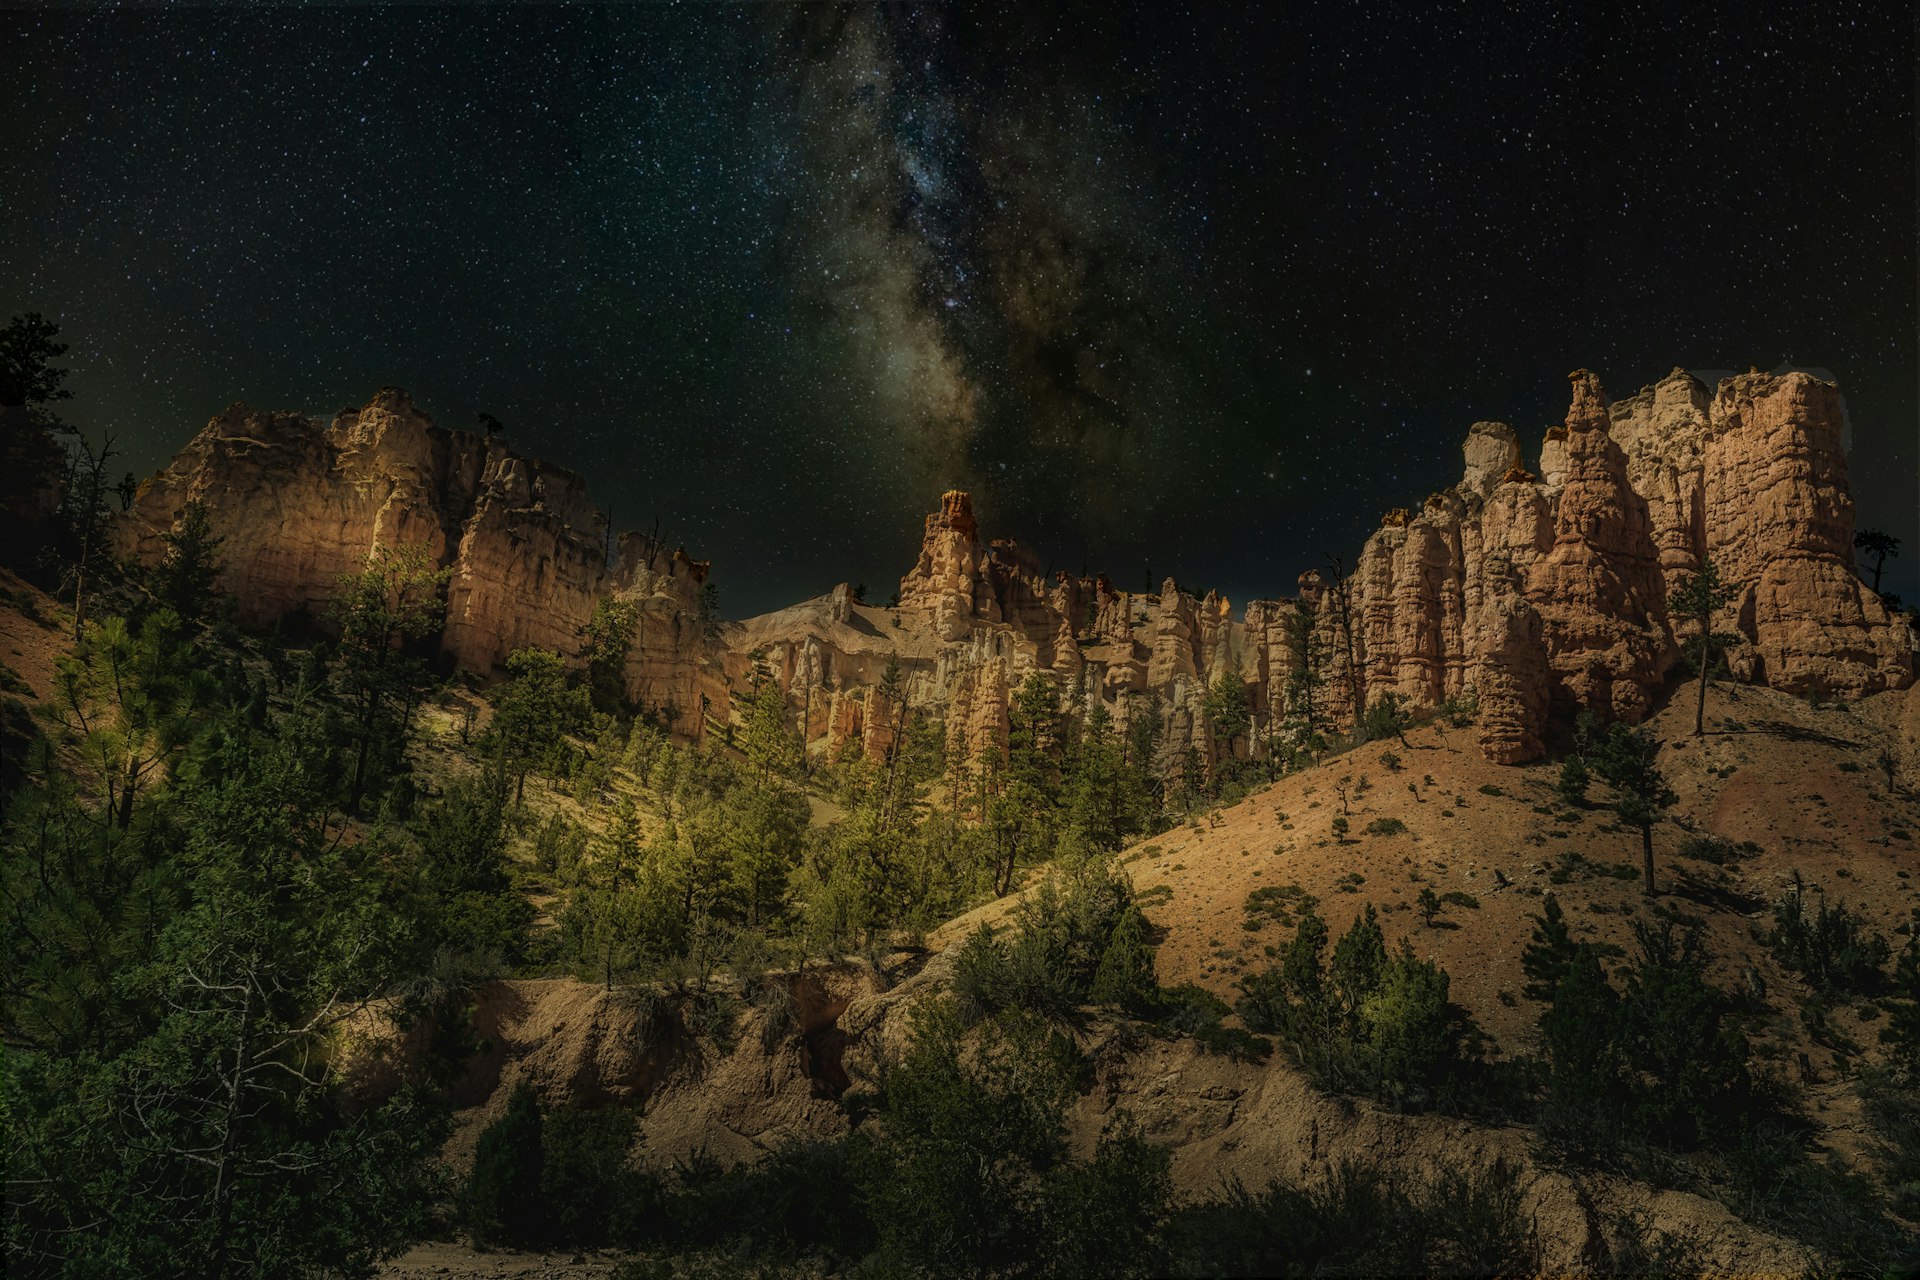 The night sky above Bryce Canyon National Park, Utah